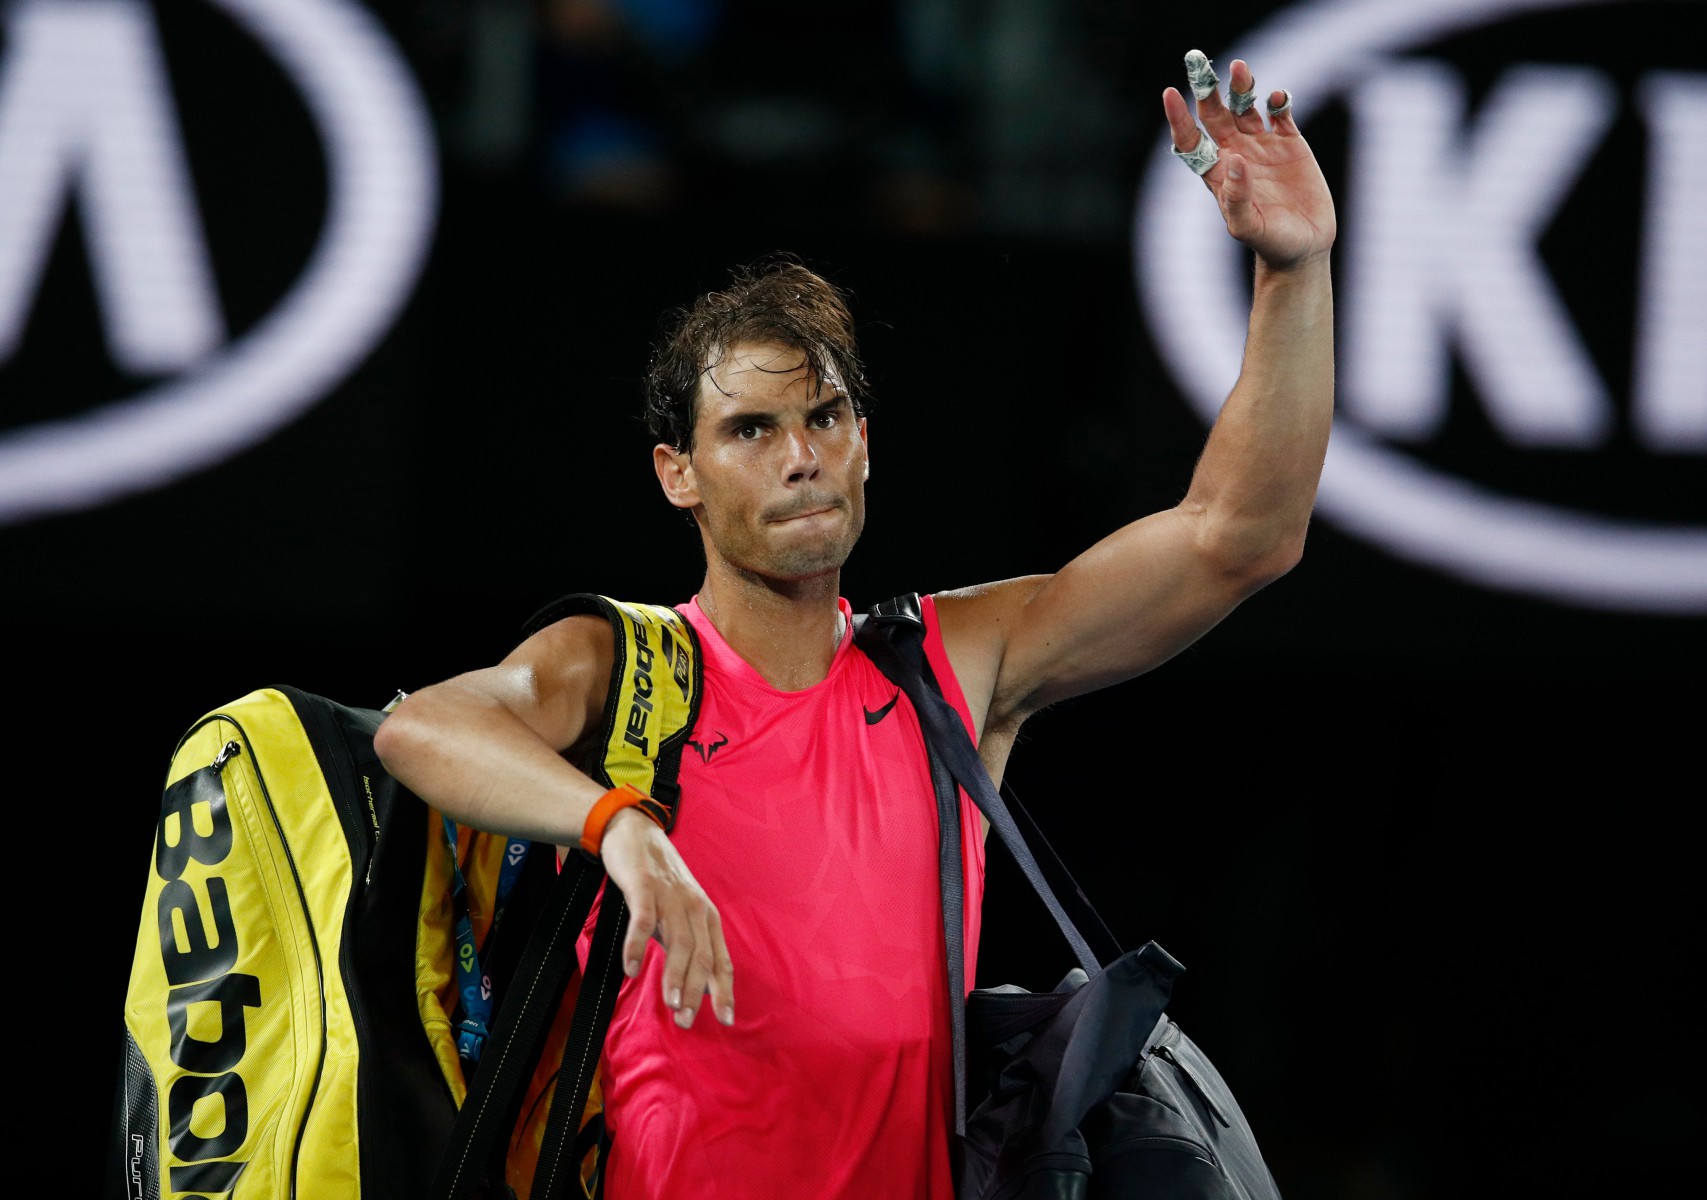 Nadal was forced to wave goodbye to Melbourne at the quarter-final stage for the second time in three years